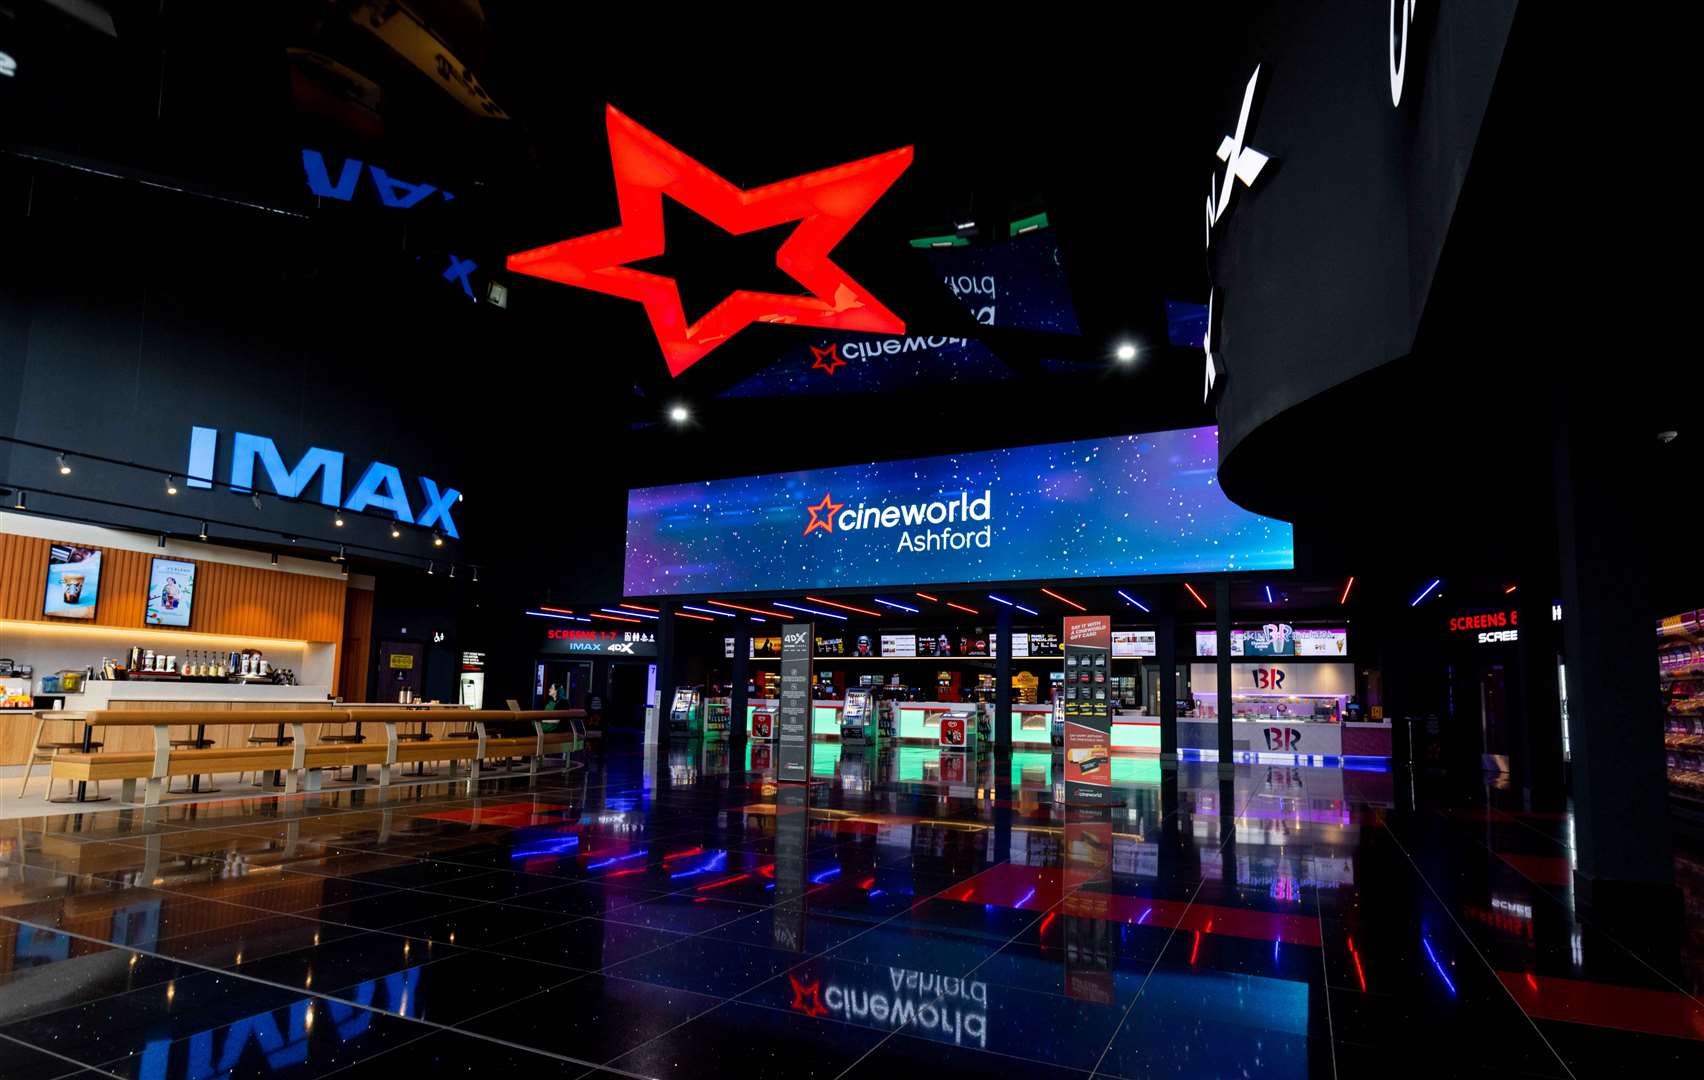 Cineworld, which also owns Picturehouse, has two sites in Ashford